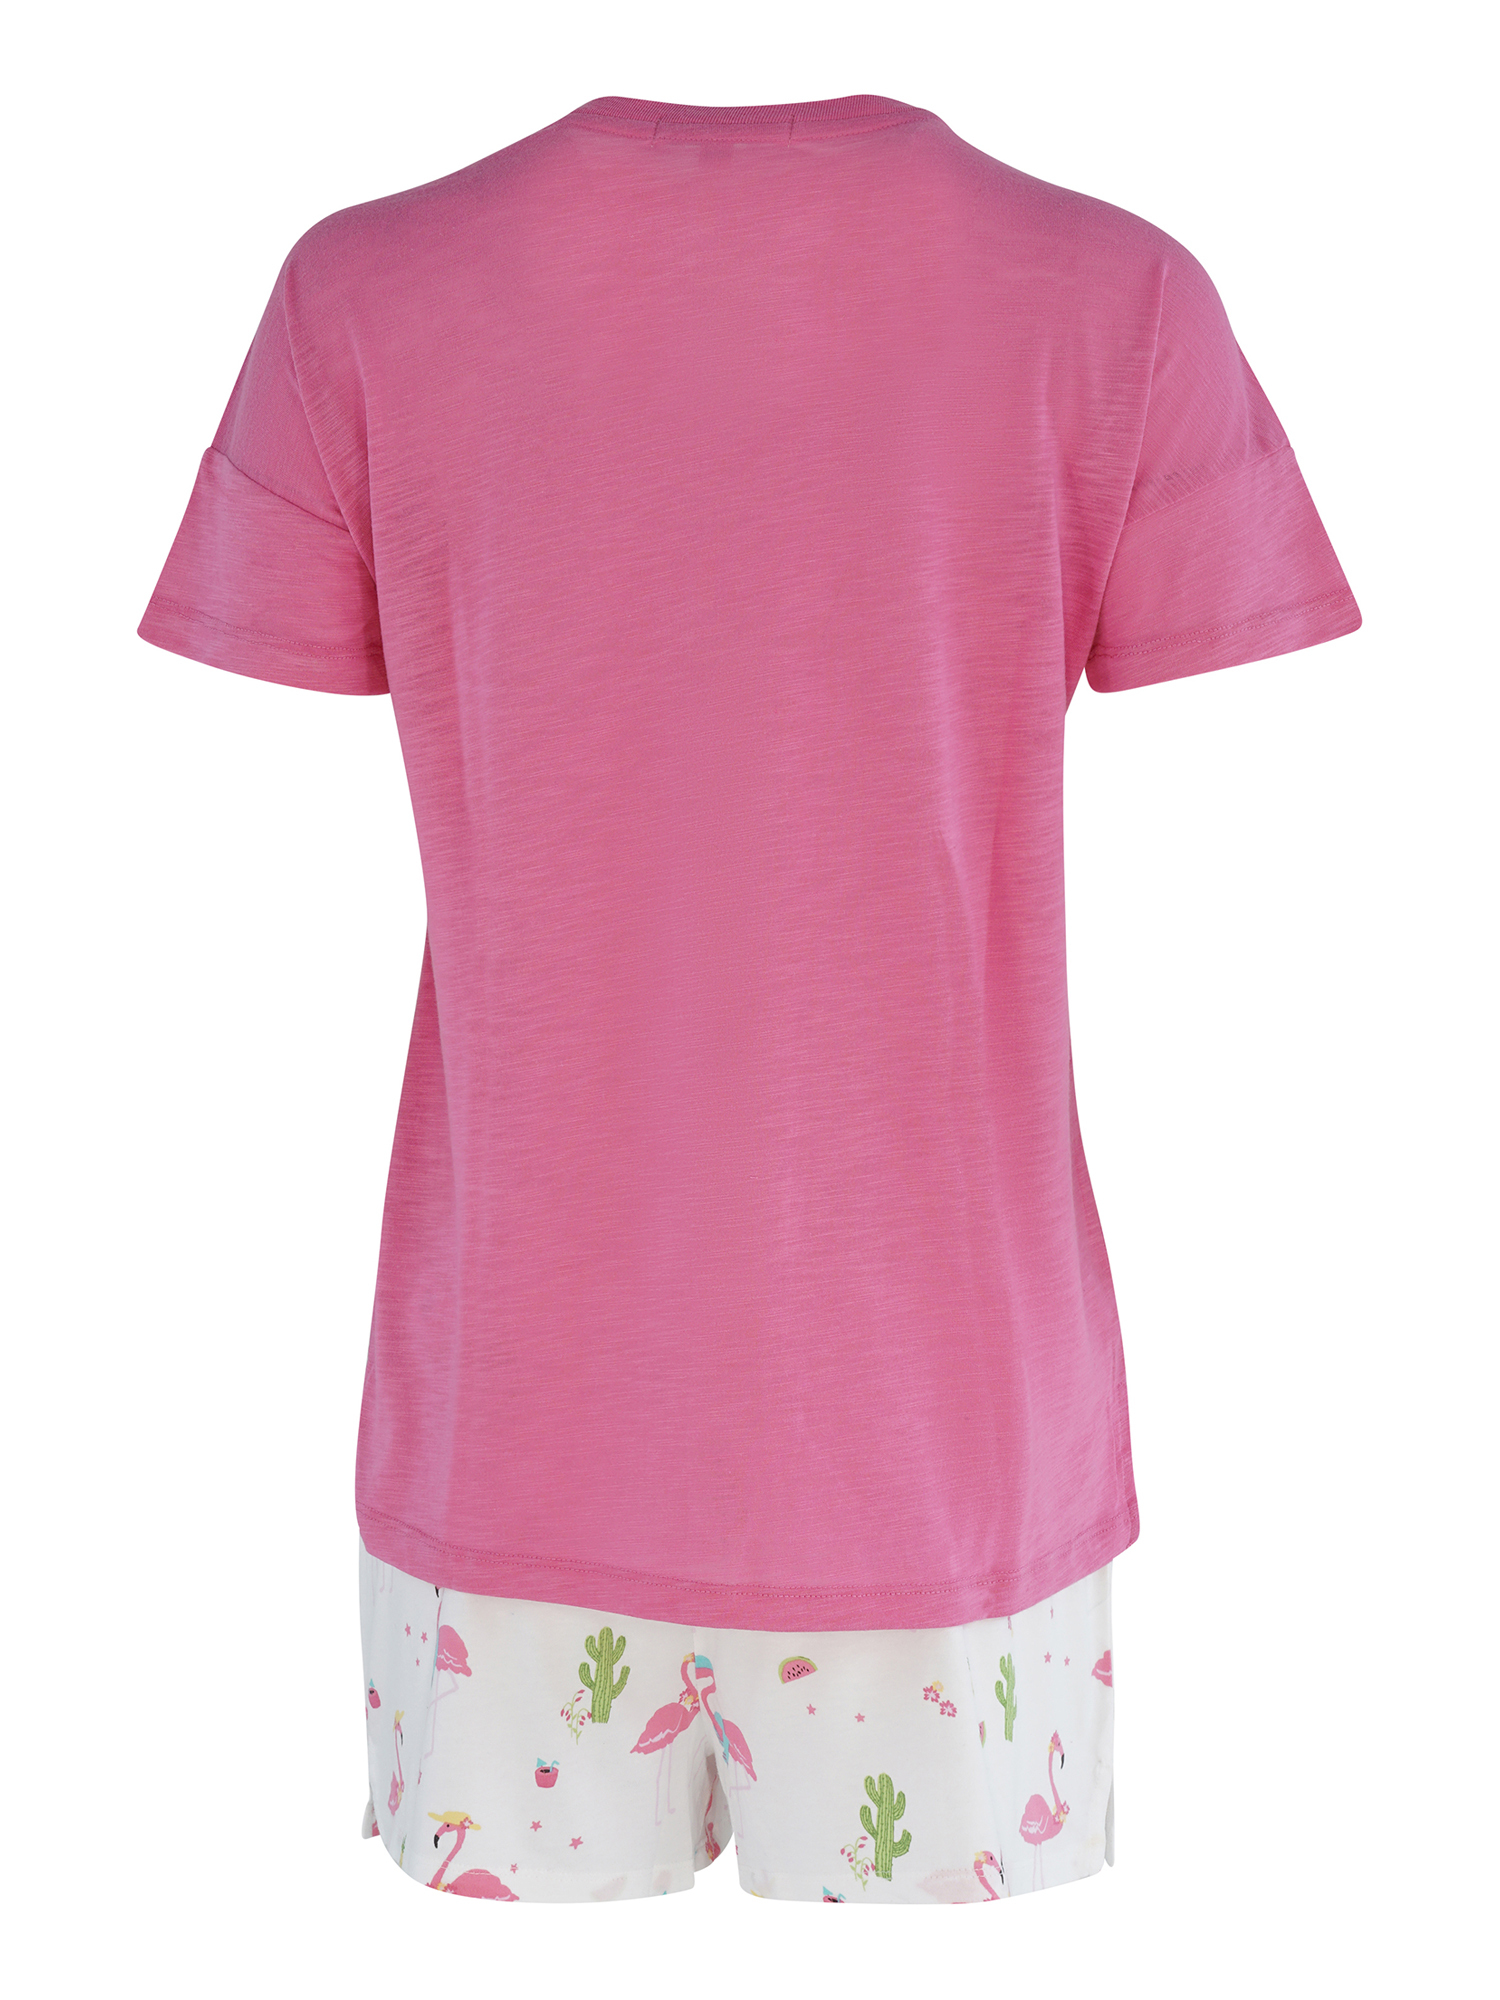 PJ Salvage Shorty in Pink 